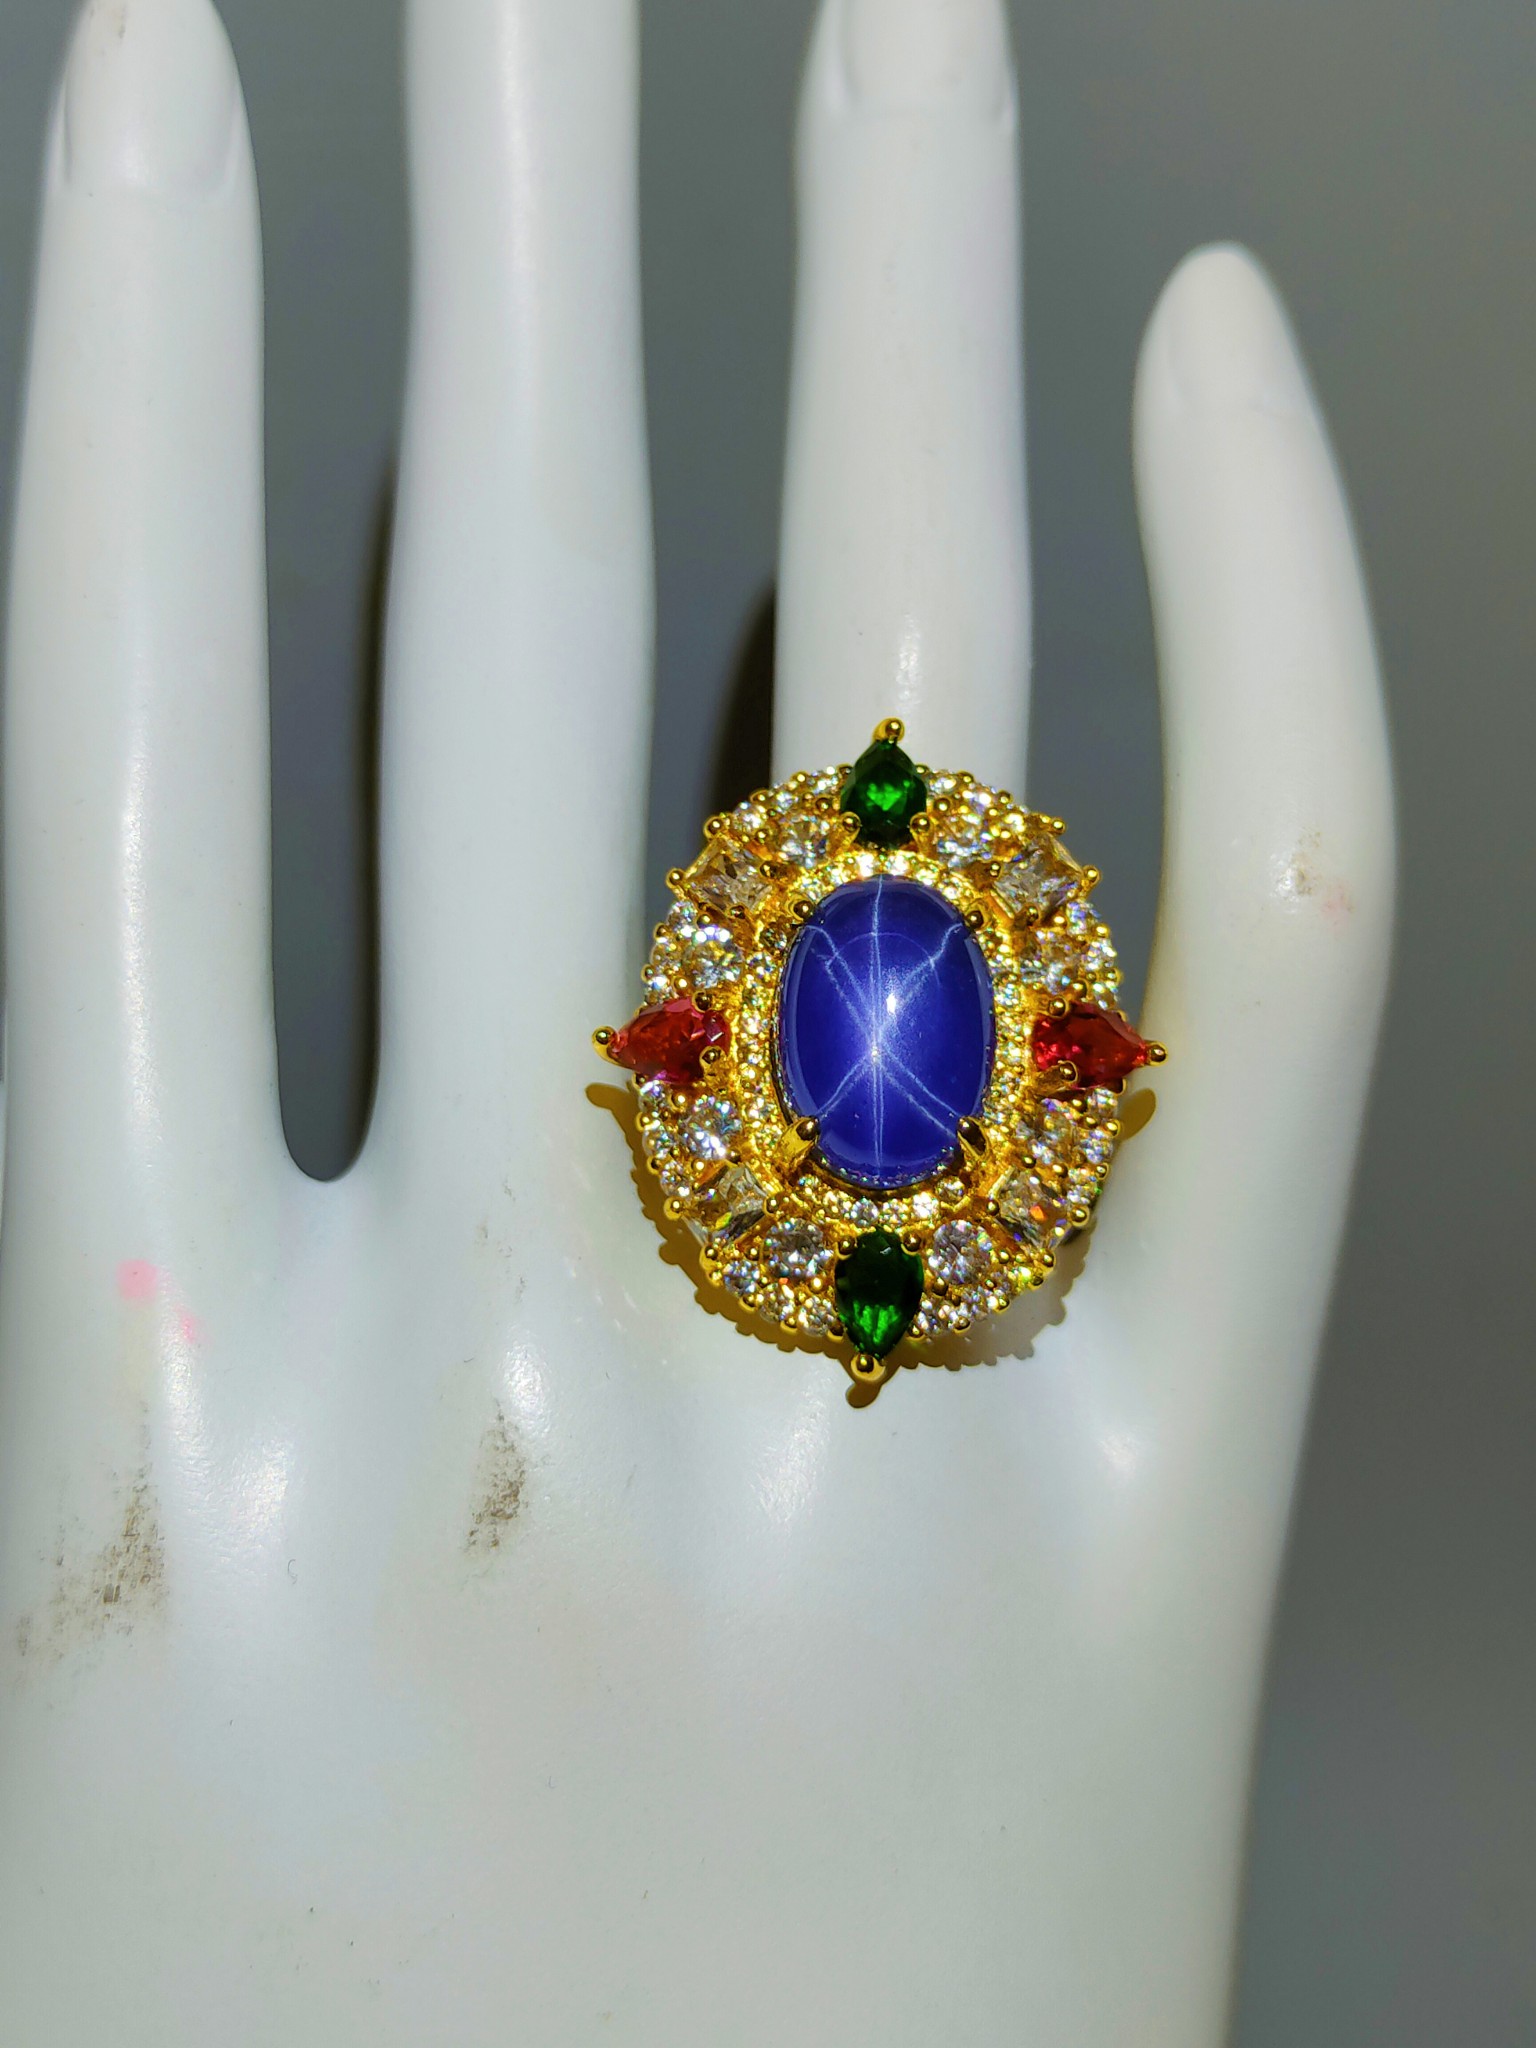 Nanmu gold-plated boxed silver gilt ring with star gemstones - Image 4 of 7